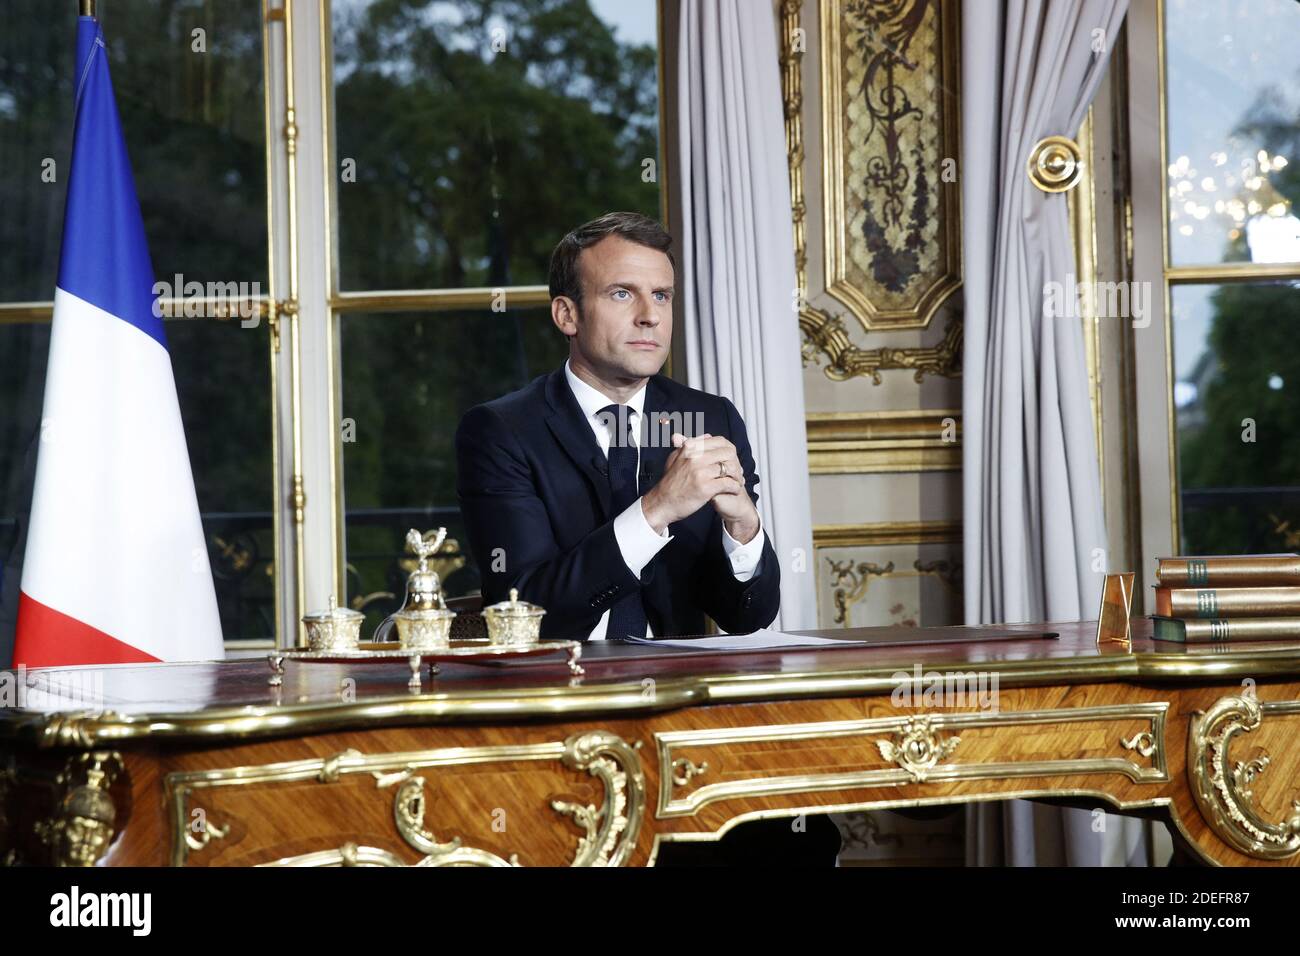 French President Emmanuel Macron sits at his desk after addressing the  French nation following a massive fire at Notre Dame Cathedral, at Elysee  Palace in Paris, France, 16 April 2019. Macron canceled